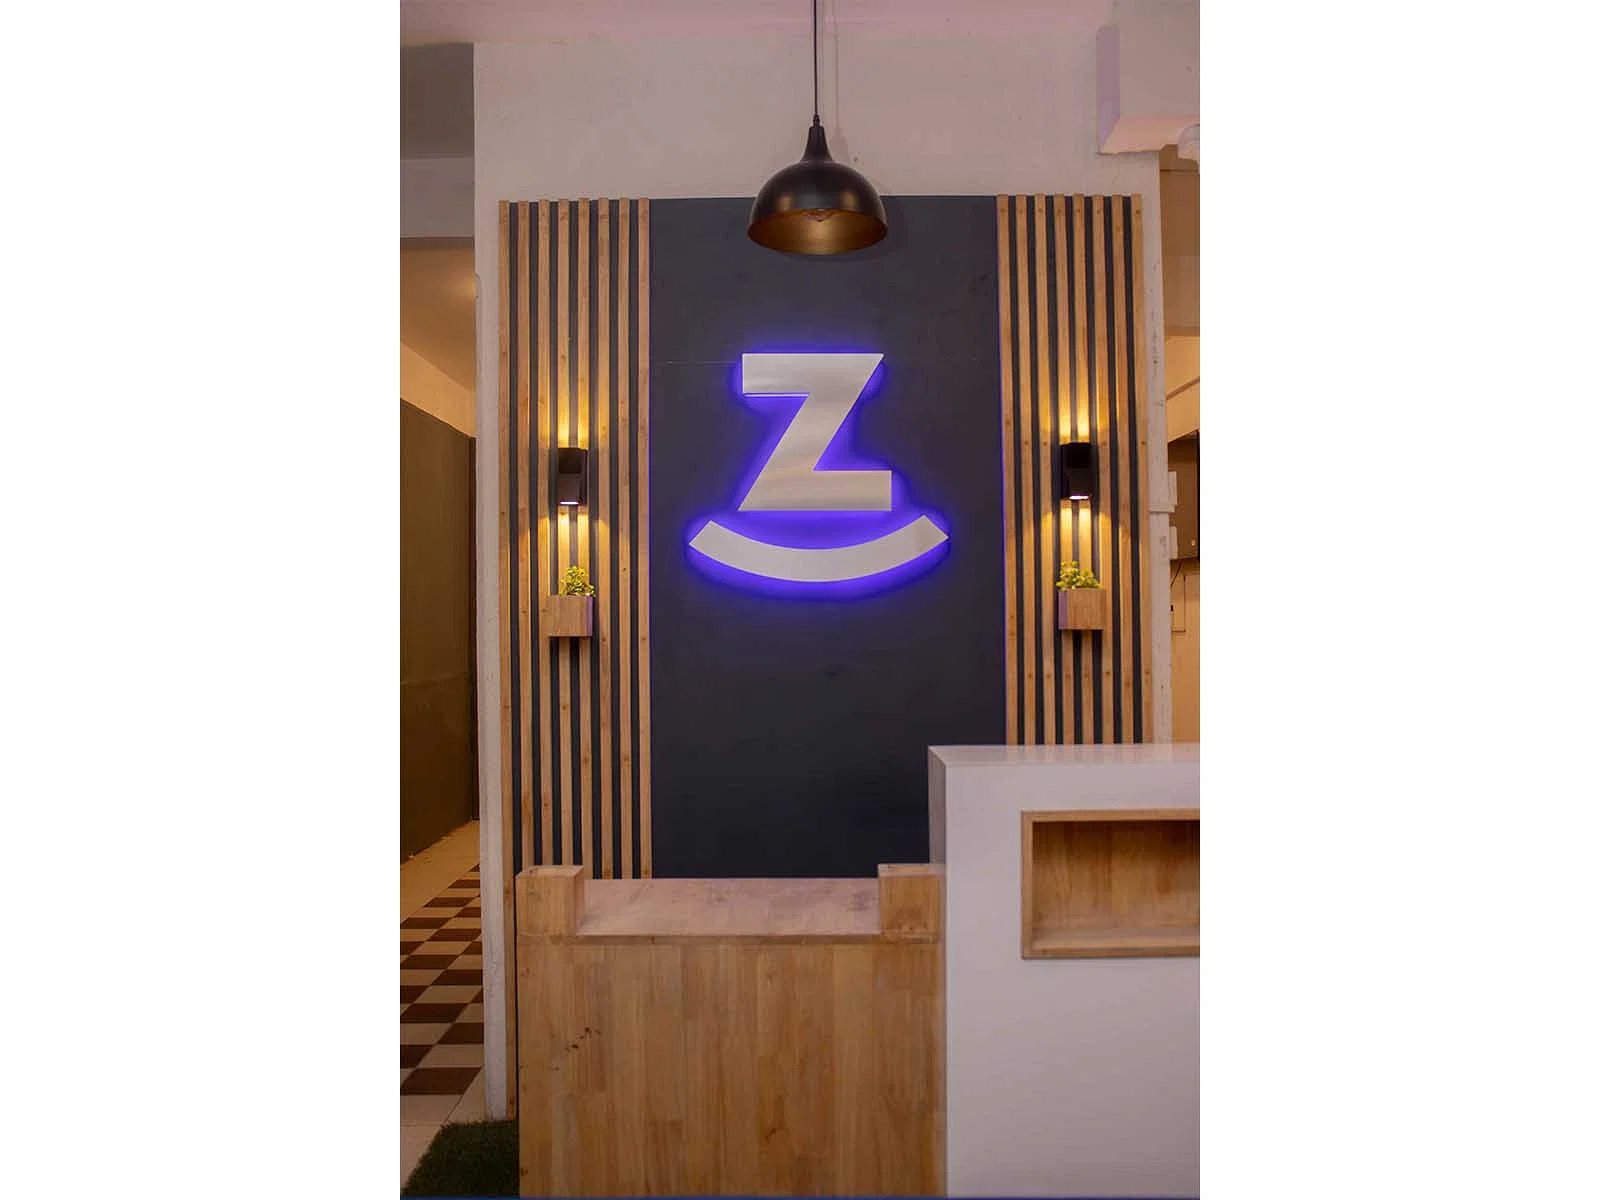 luxury PG accommodations with modern Wi-Fi, AC, and TV in Keshav Nagar-Pune-Zolo Azure